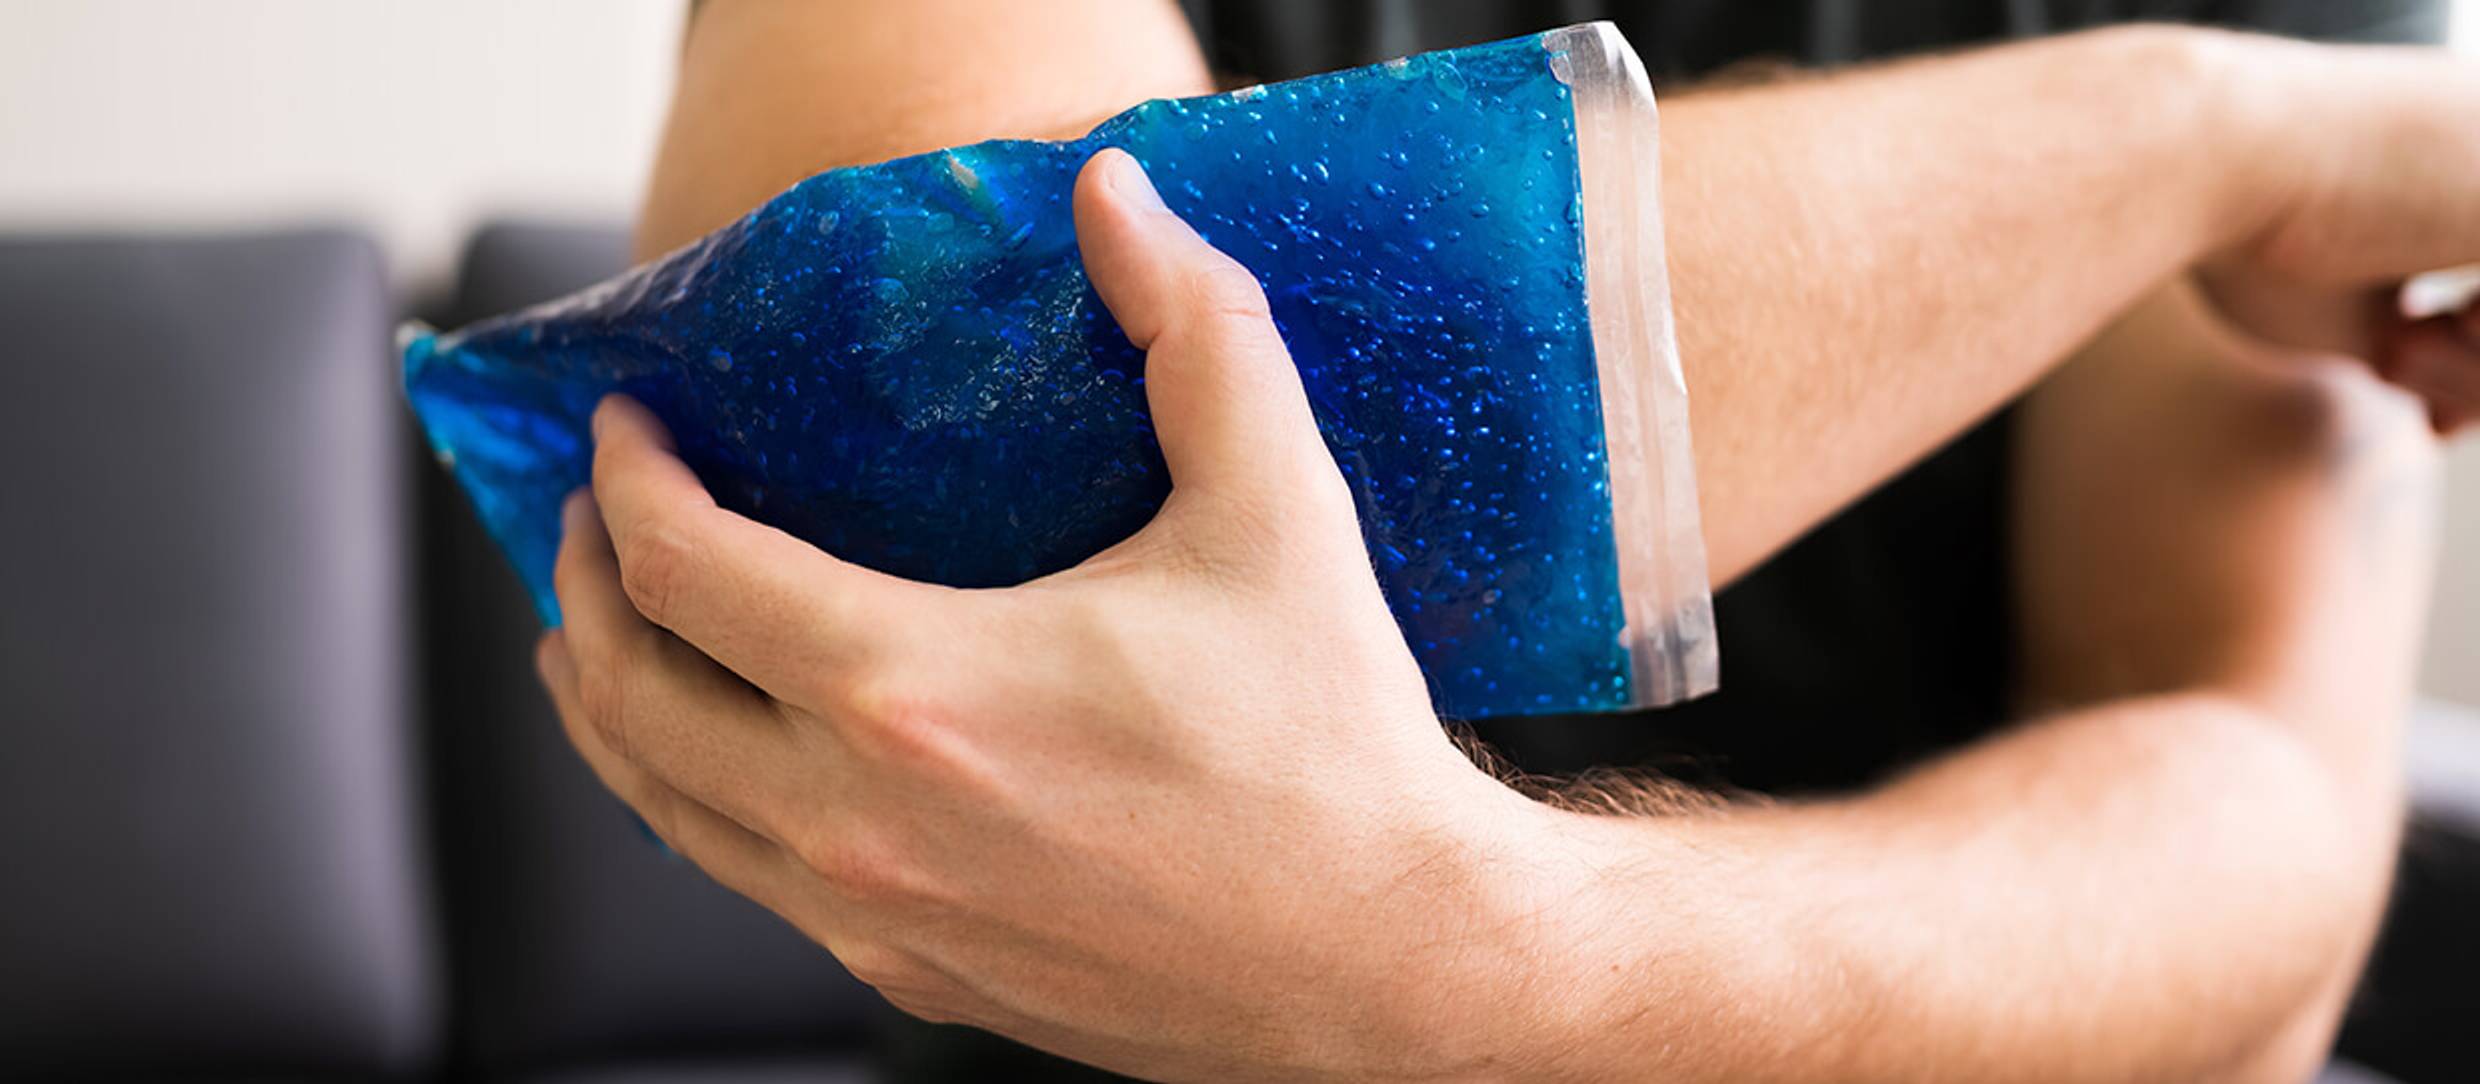 Man holding Cold Gel pack against his elbow for pain relief.